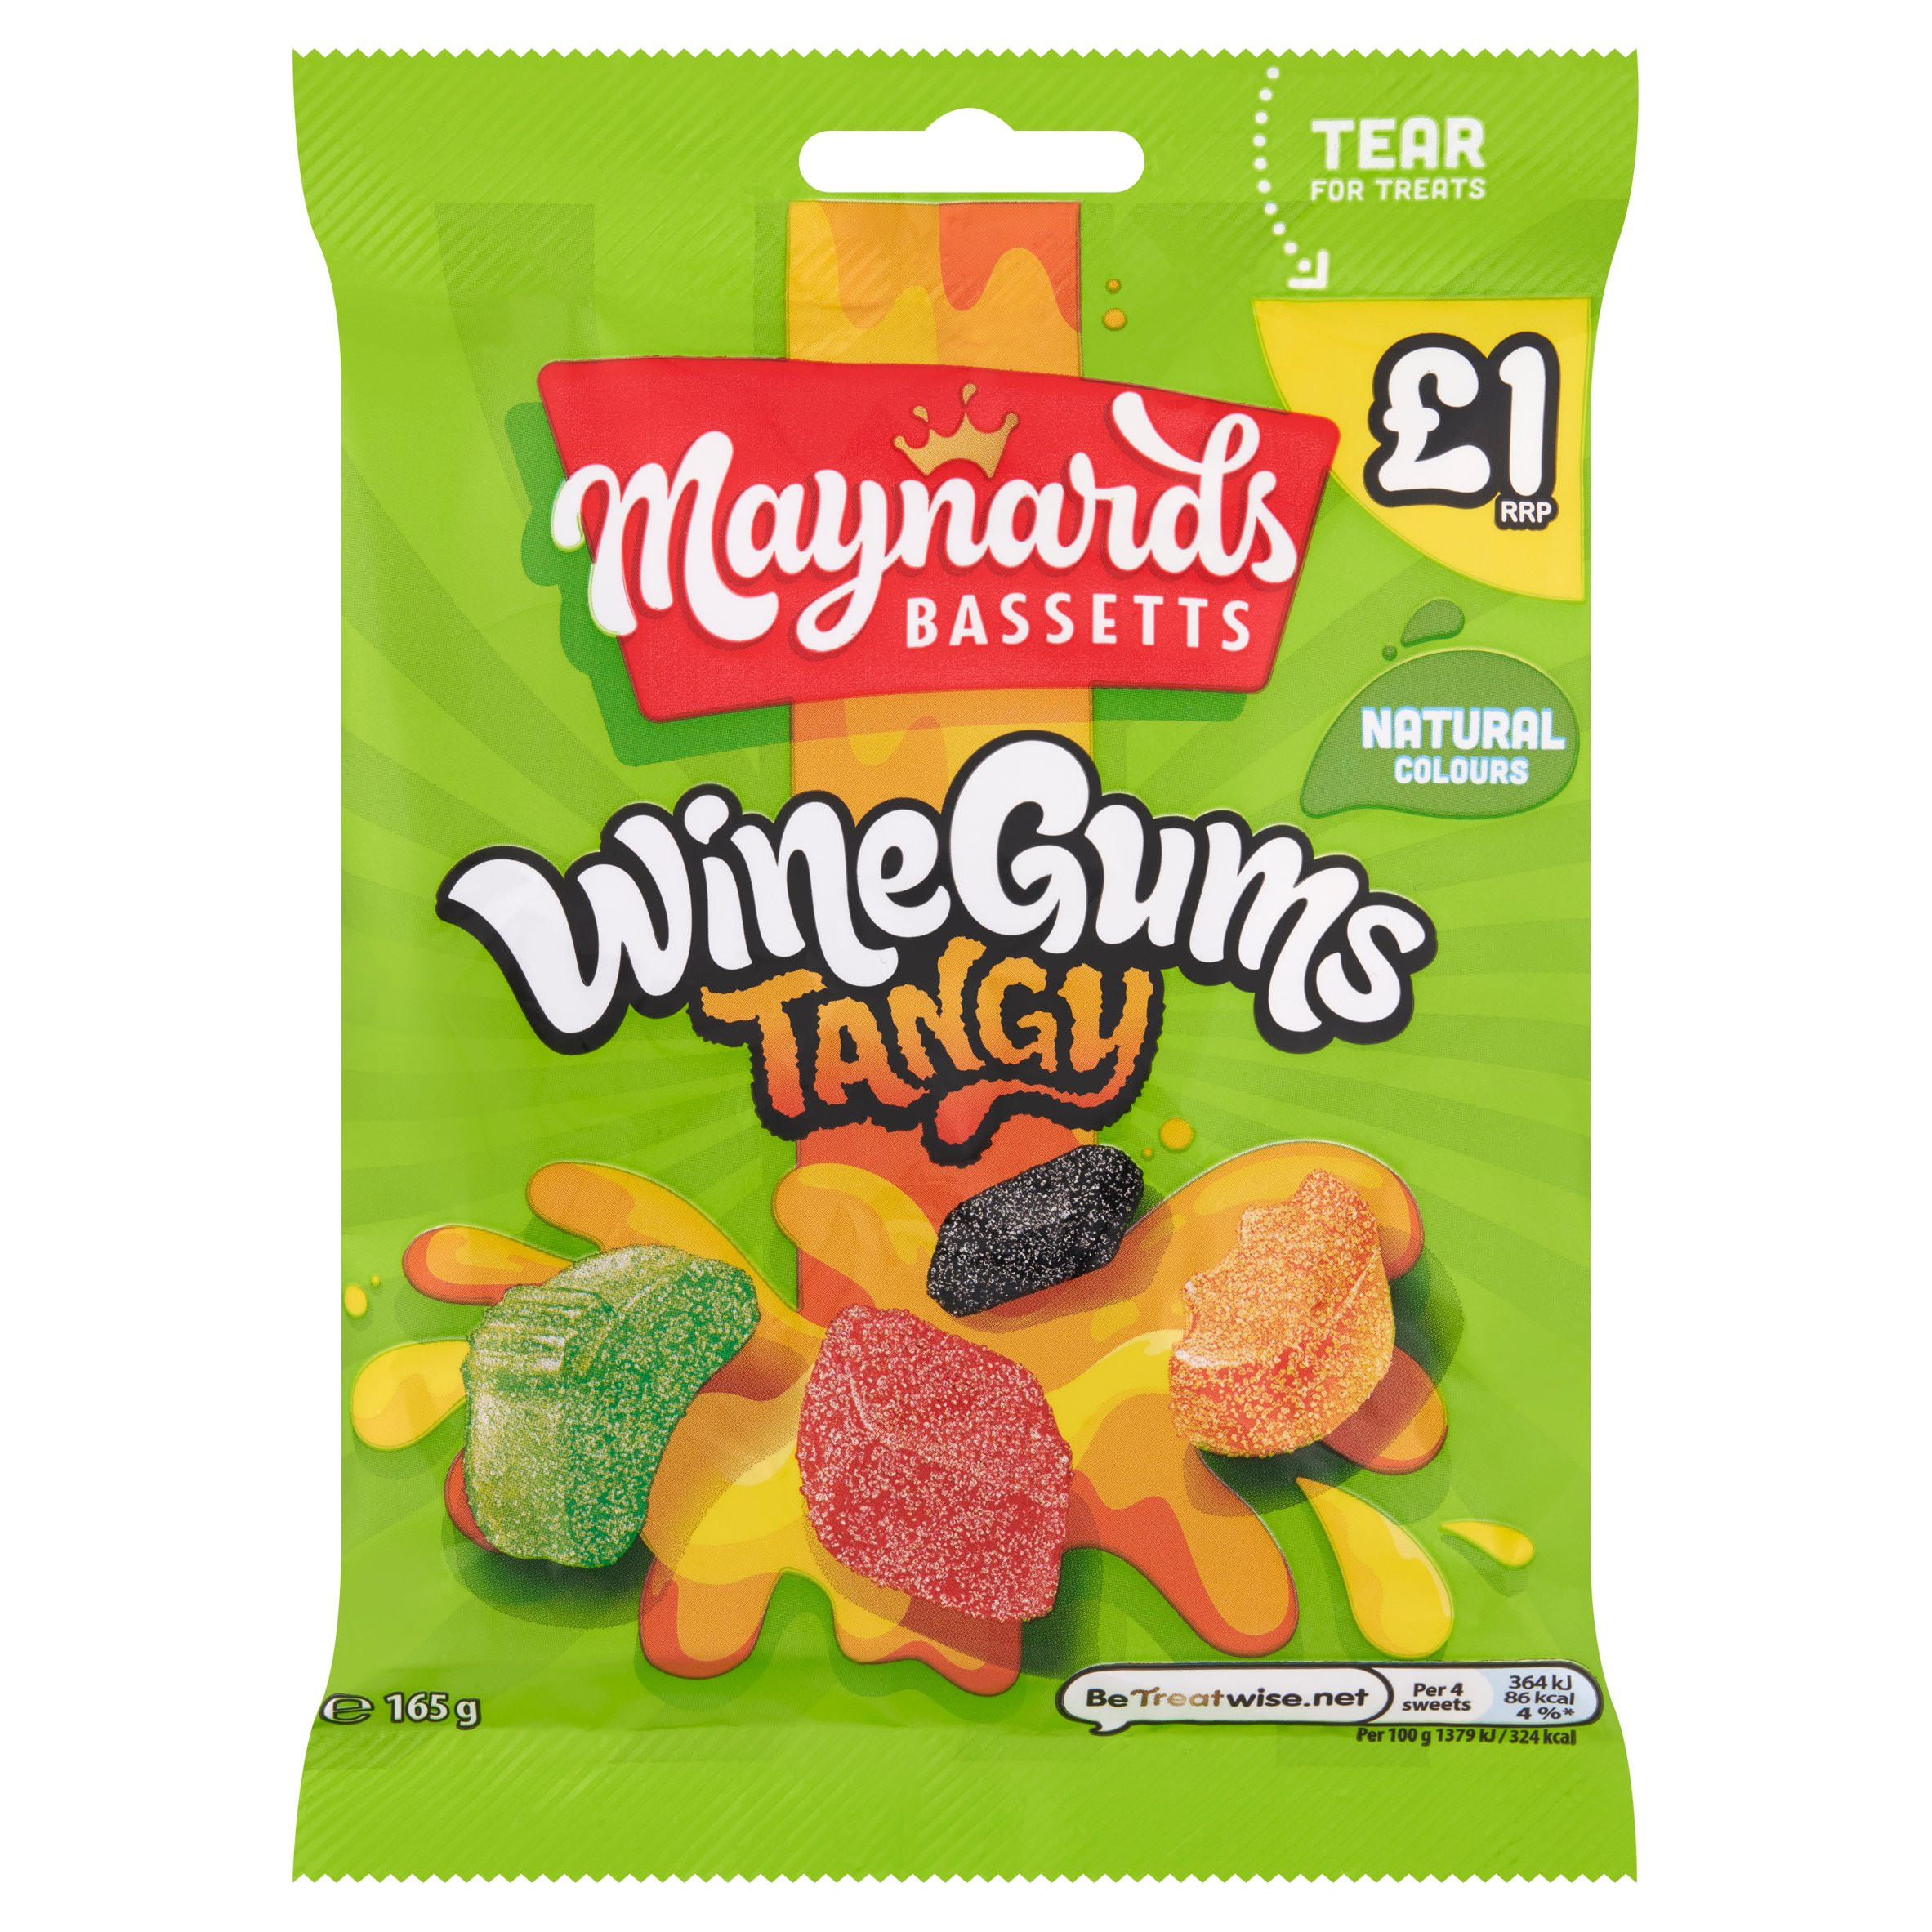 Maynards Bassetts Wine Gums Tangy 165g Sharing Bags And Tubs Iceland